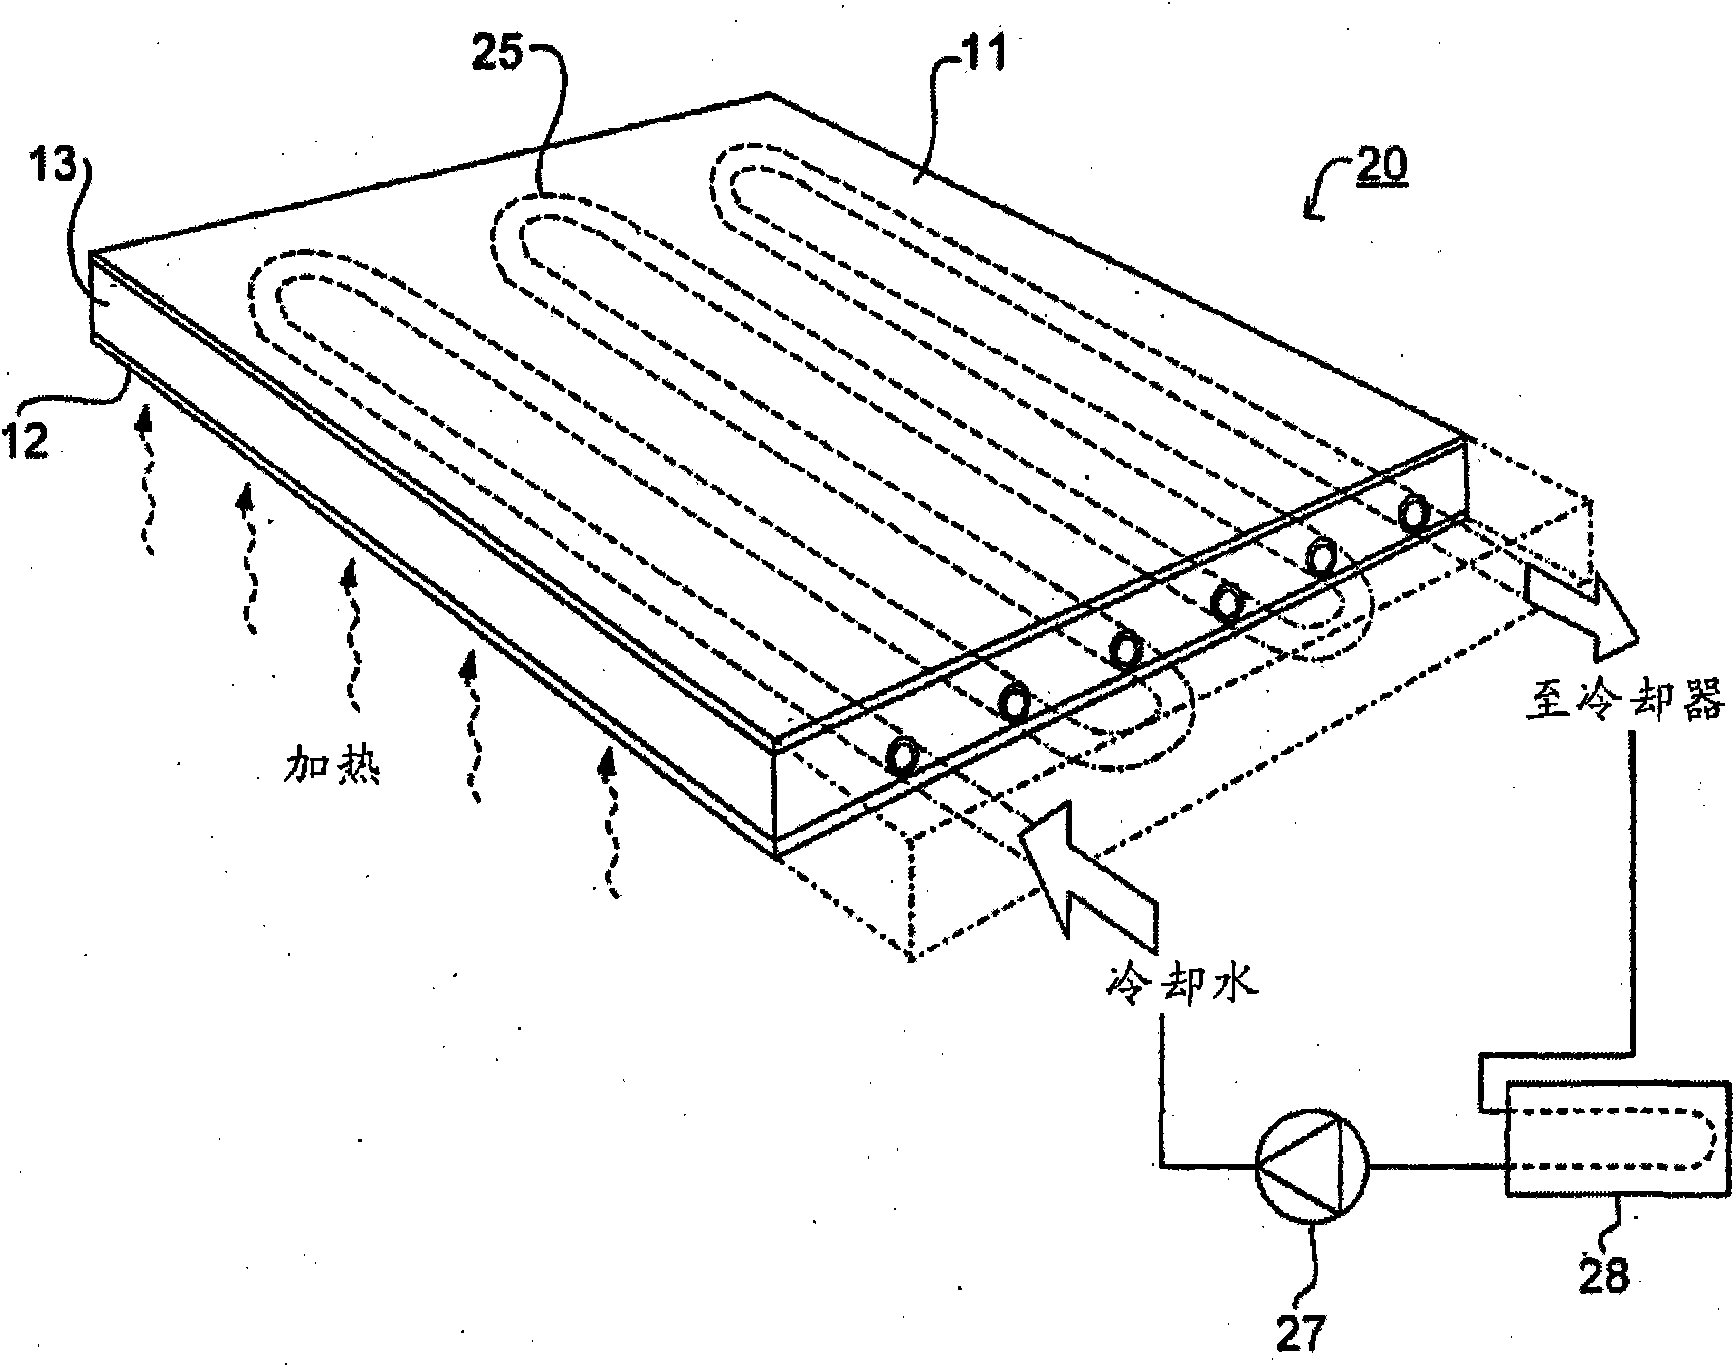 Improved structural sandwich plate panels and methods of making the same